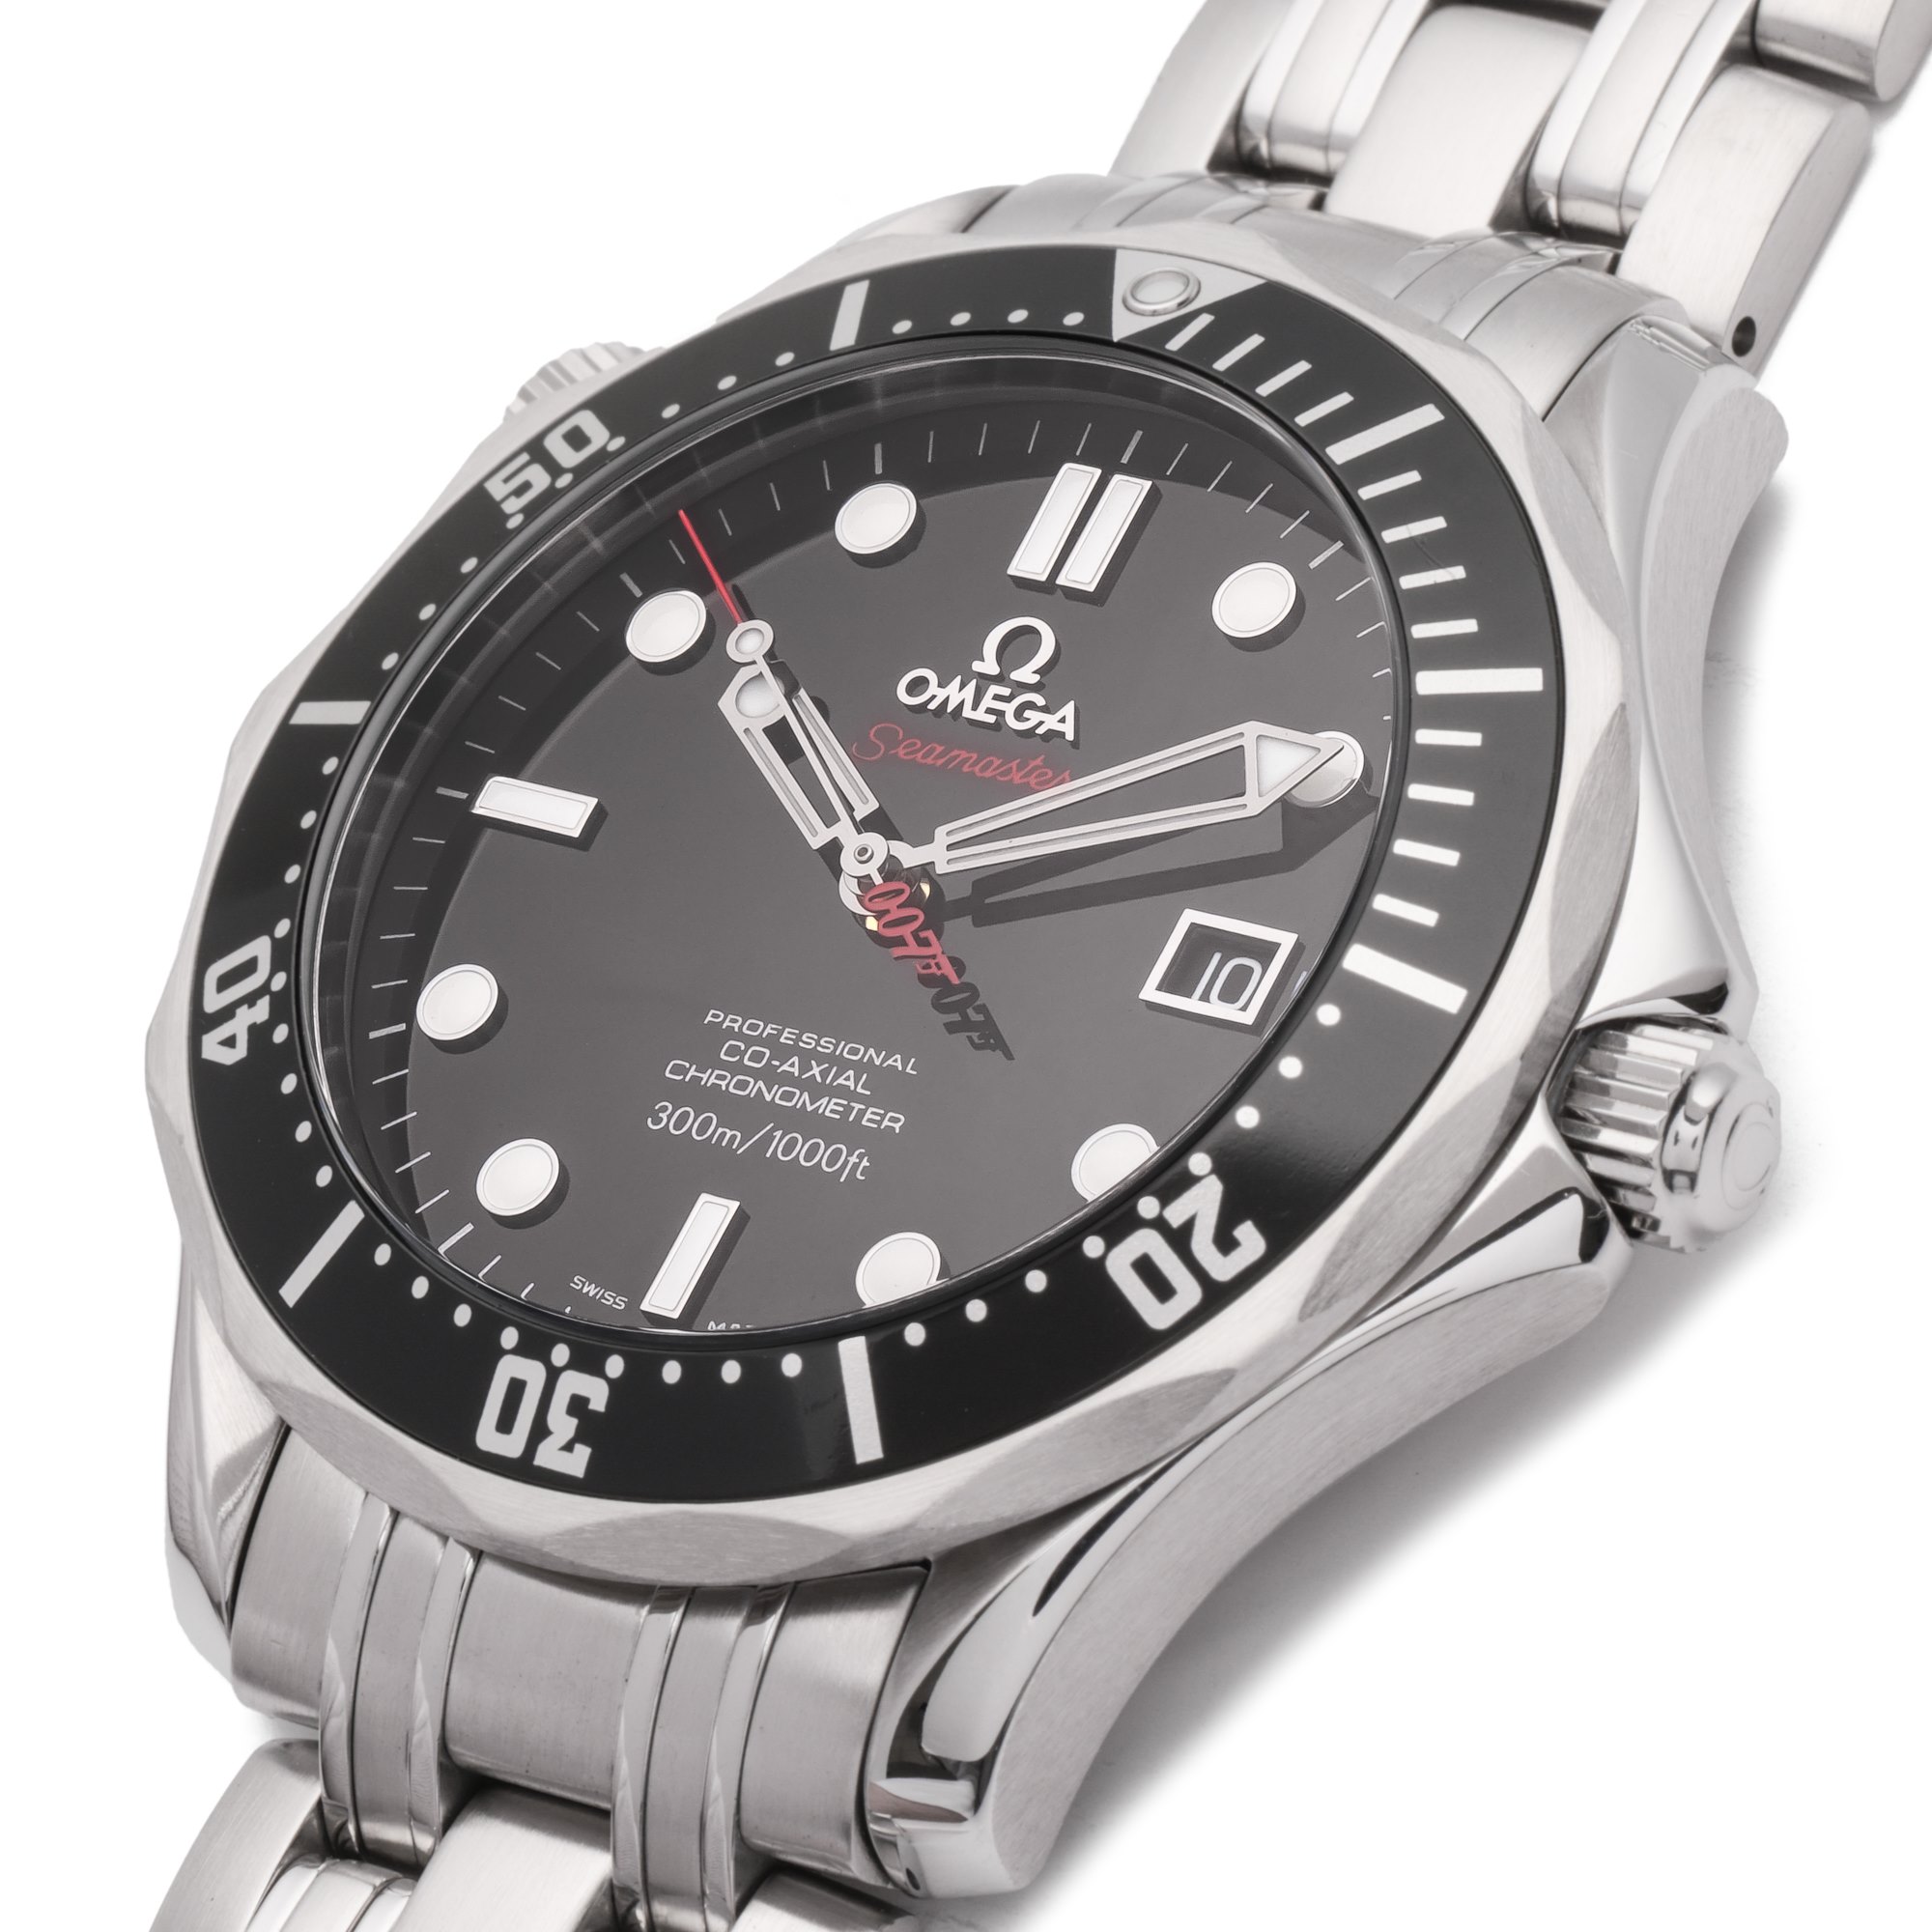 Omega Seamaster 300 007 Limited Series of 10007 Roestvrij Staal 212.30.41.20.01.001